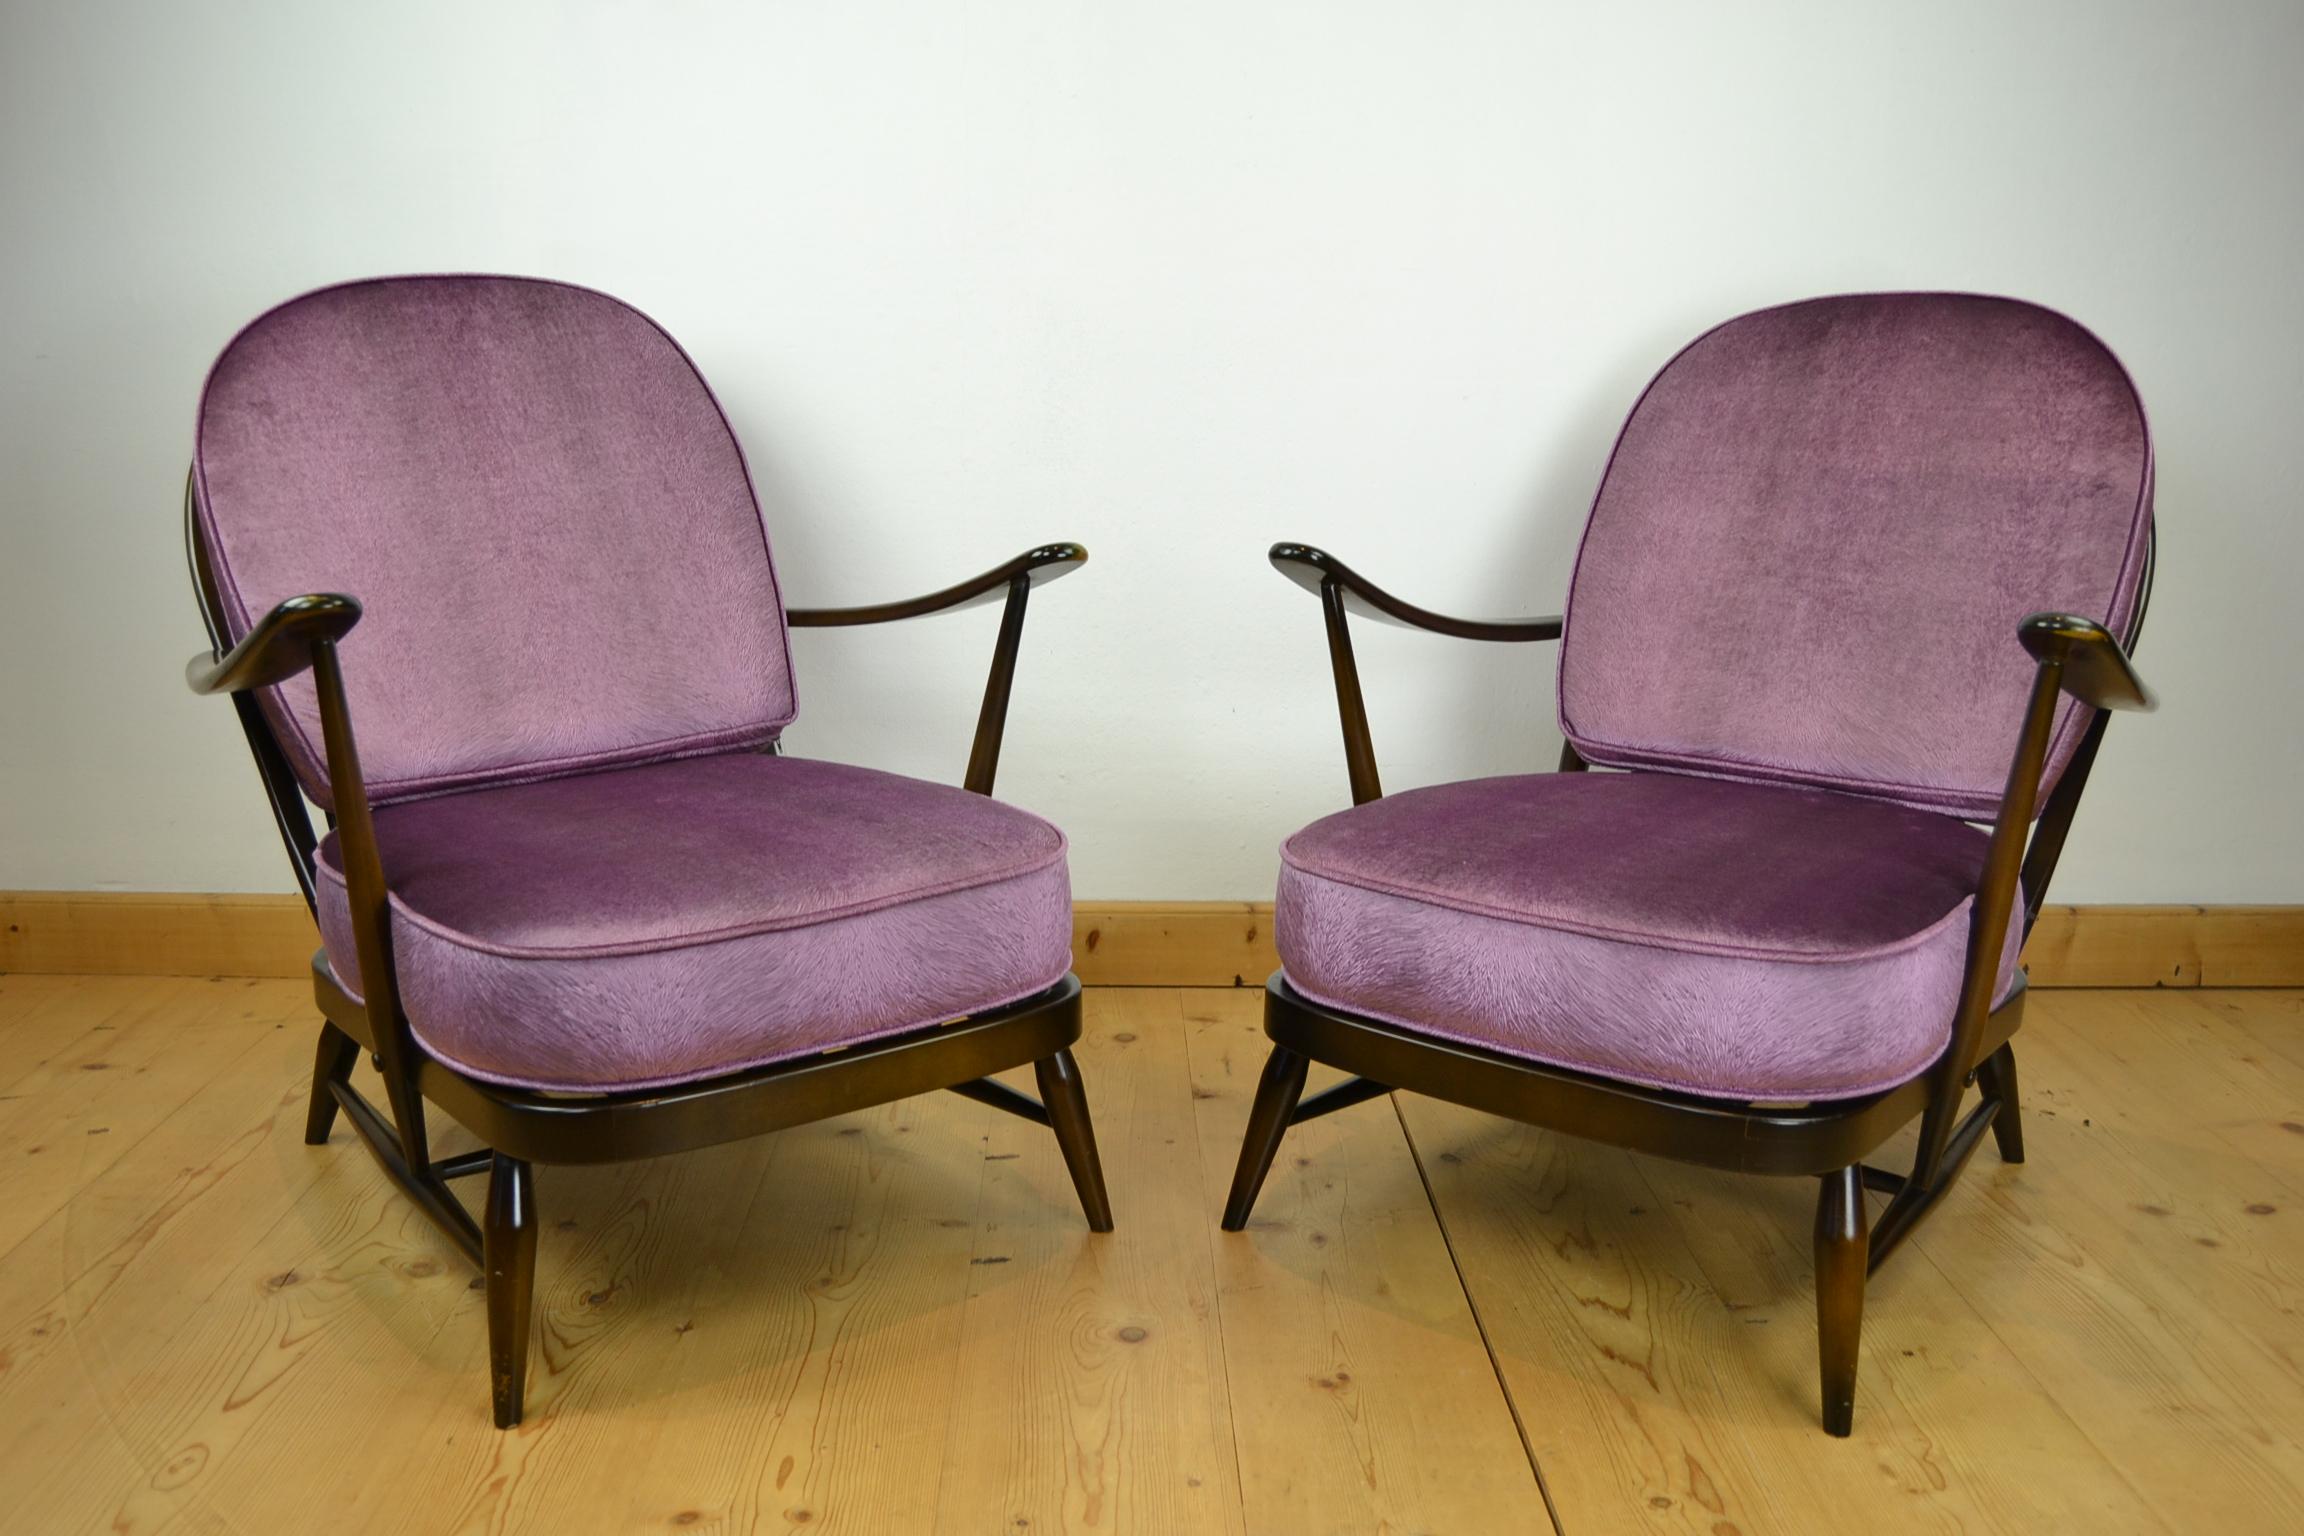 1970s set of 2 Ercol Windsor range armchairs.
These vintage armchairs with round stick backs are made of dark solid elm. 
Both still have their label under the seat, and are dated 1979. 

They got new cushions, made by a professional,
and